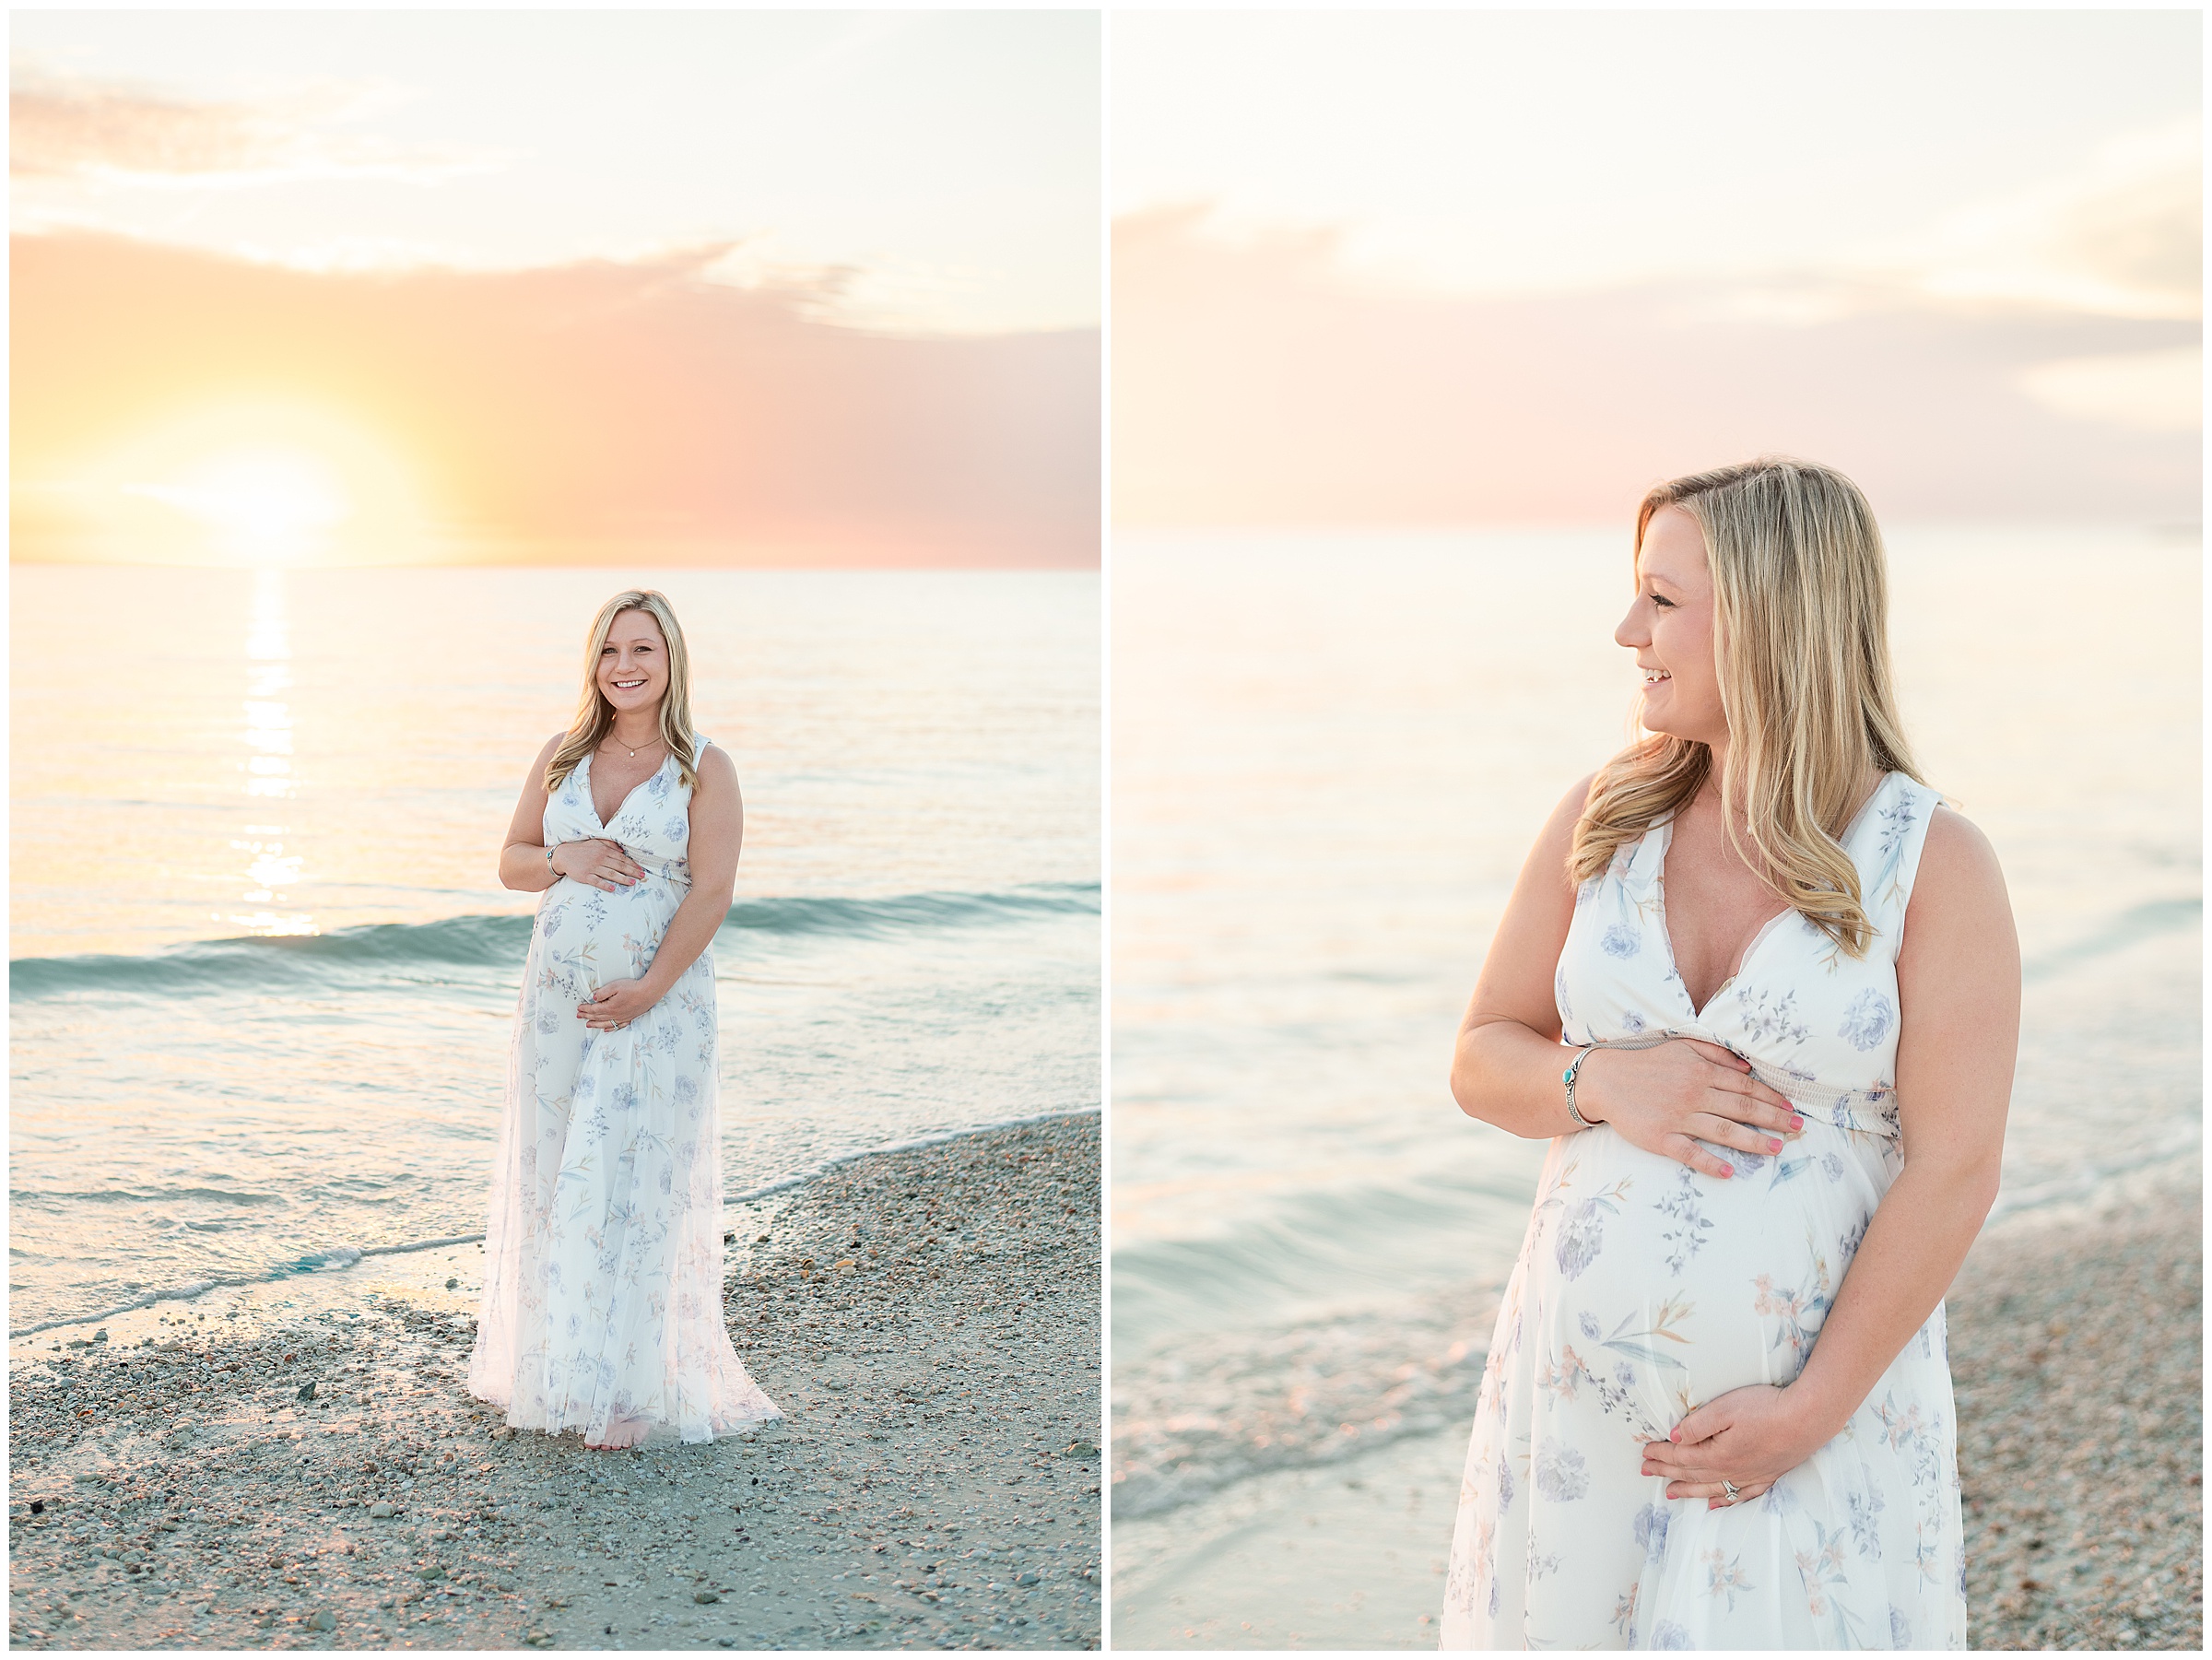 Brooke holding her belly on the beach for her Maternity photos at Honeymoon Island State Park in Florida. 